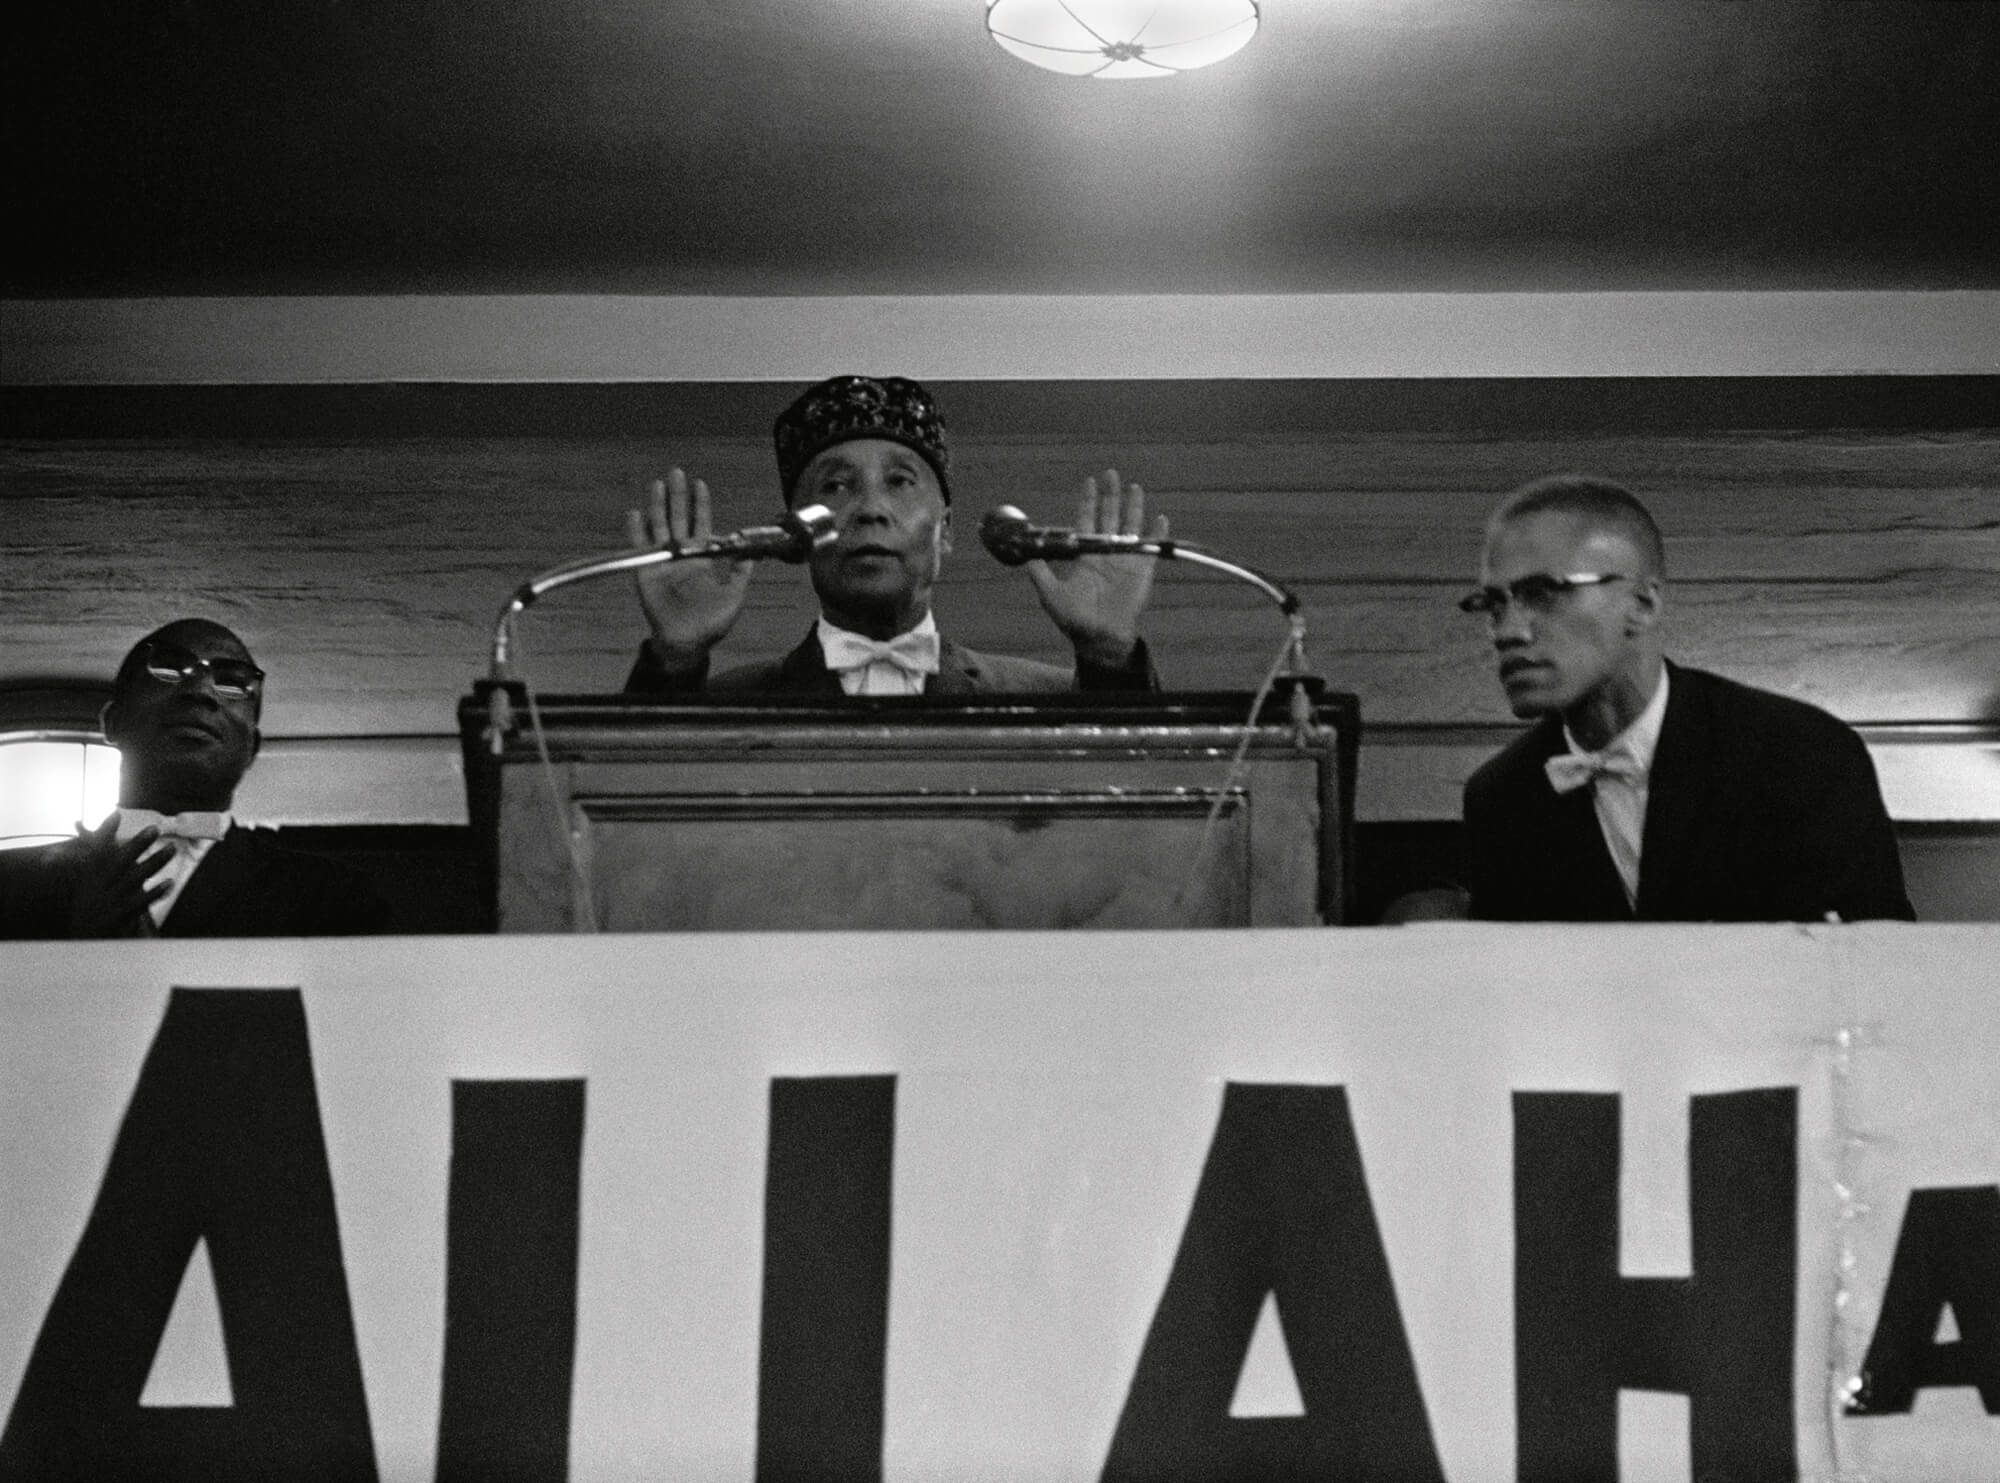 A nineteen sixty-one photograph of Elijah Muhammad and Malcolm X.